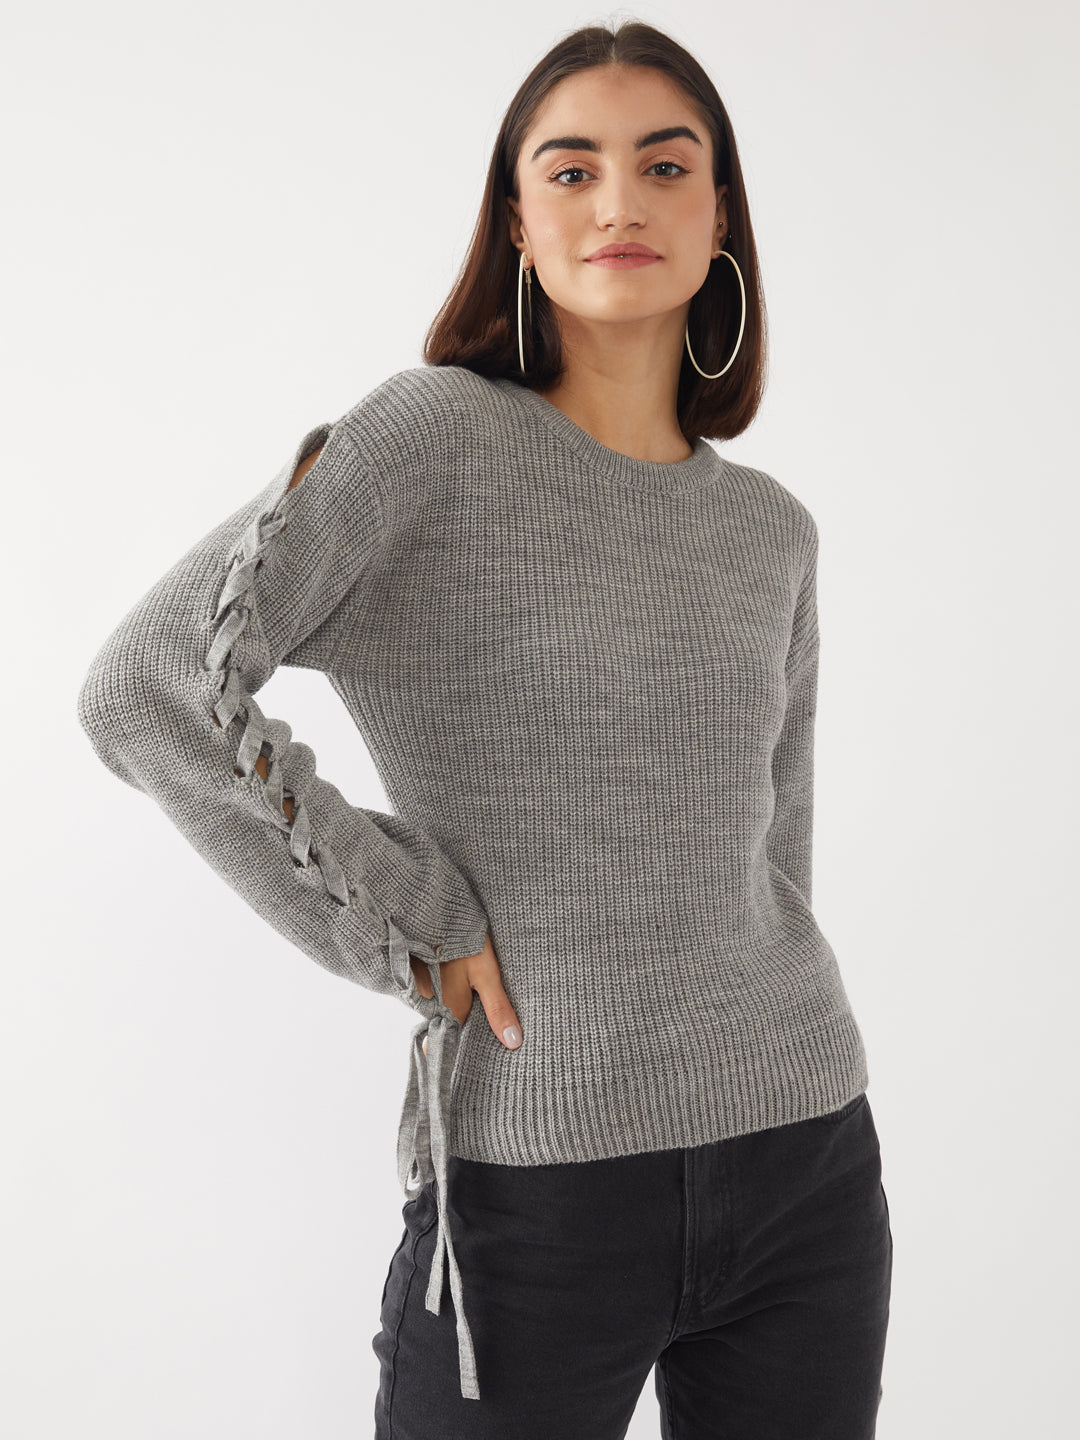 Grey Solid Tie-Up Sweater For Women